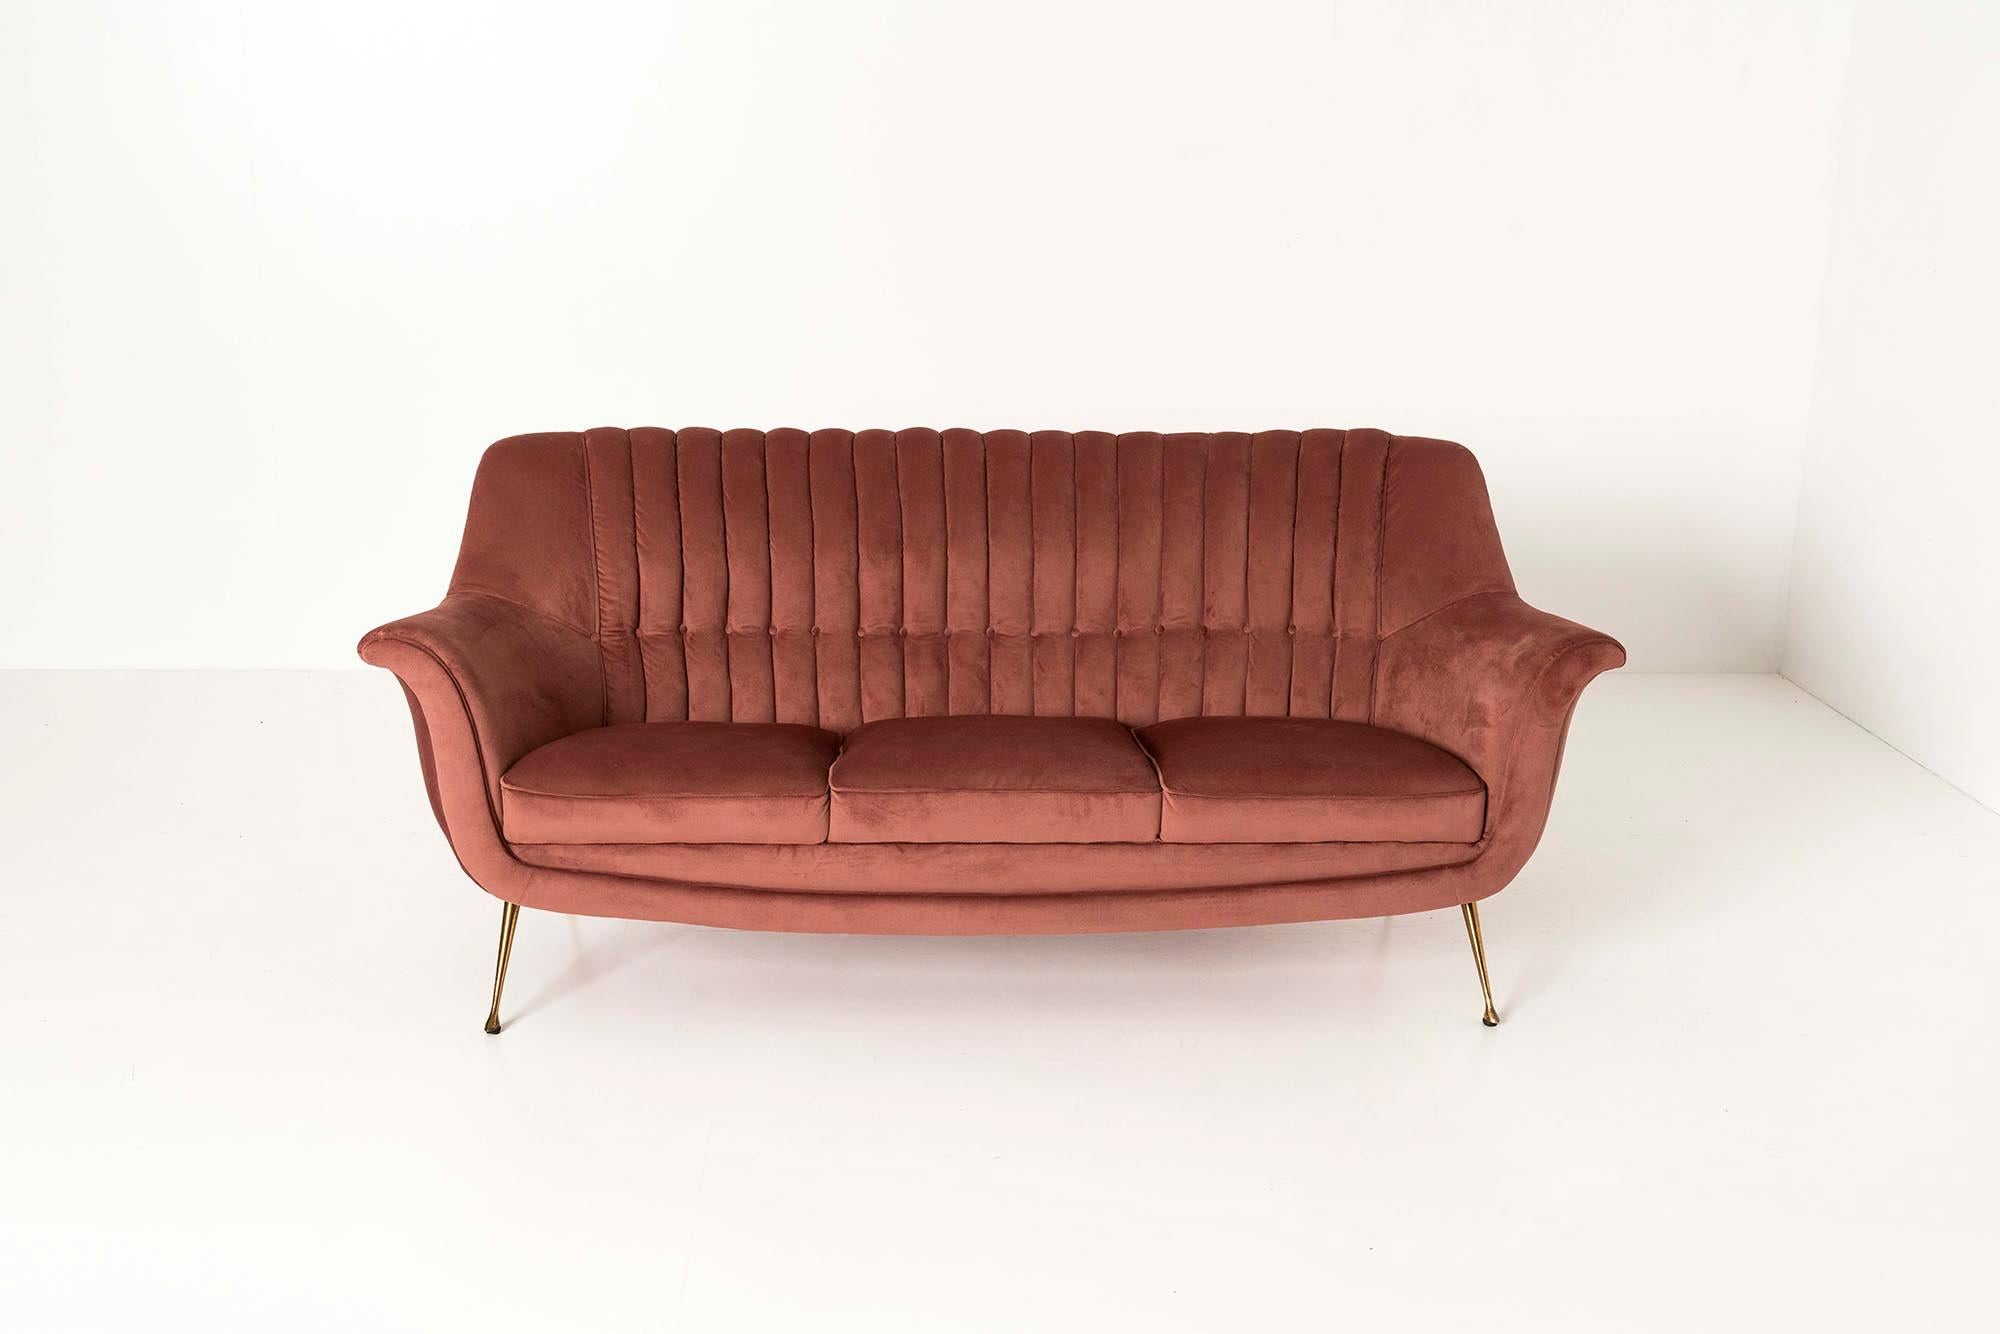 Elegant Italian three seater sofa in dark pink velvet from the 1950s. This elegant three-seater sofa would not have looked out of place in a beautiful setting from an Italian film from the 1950s. The backrest is stitched in lines and padded across